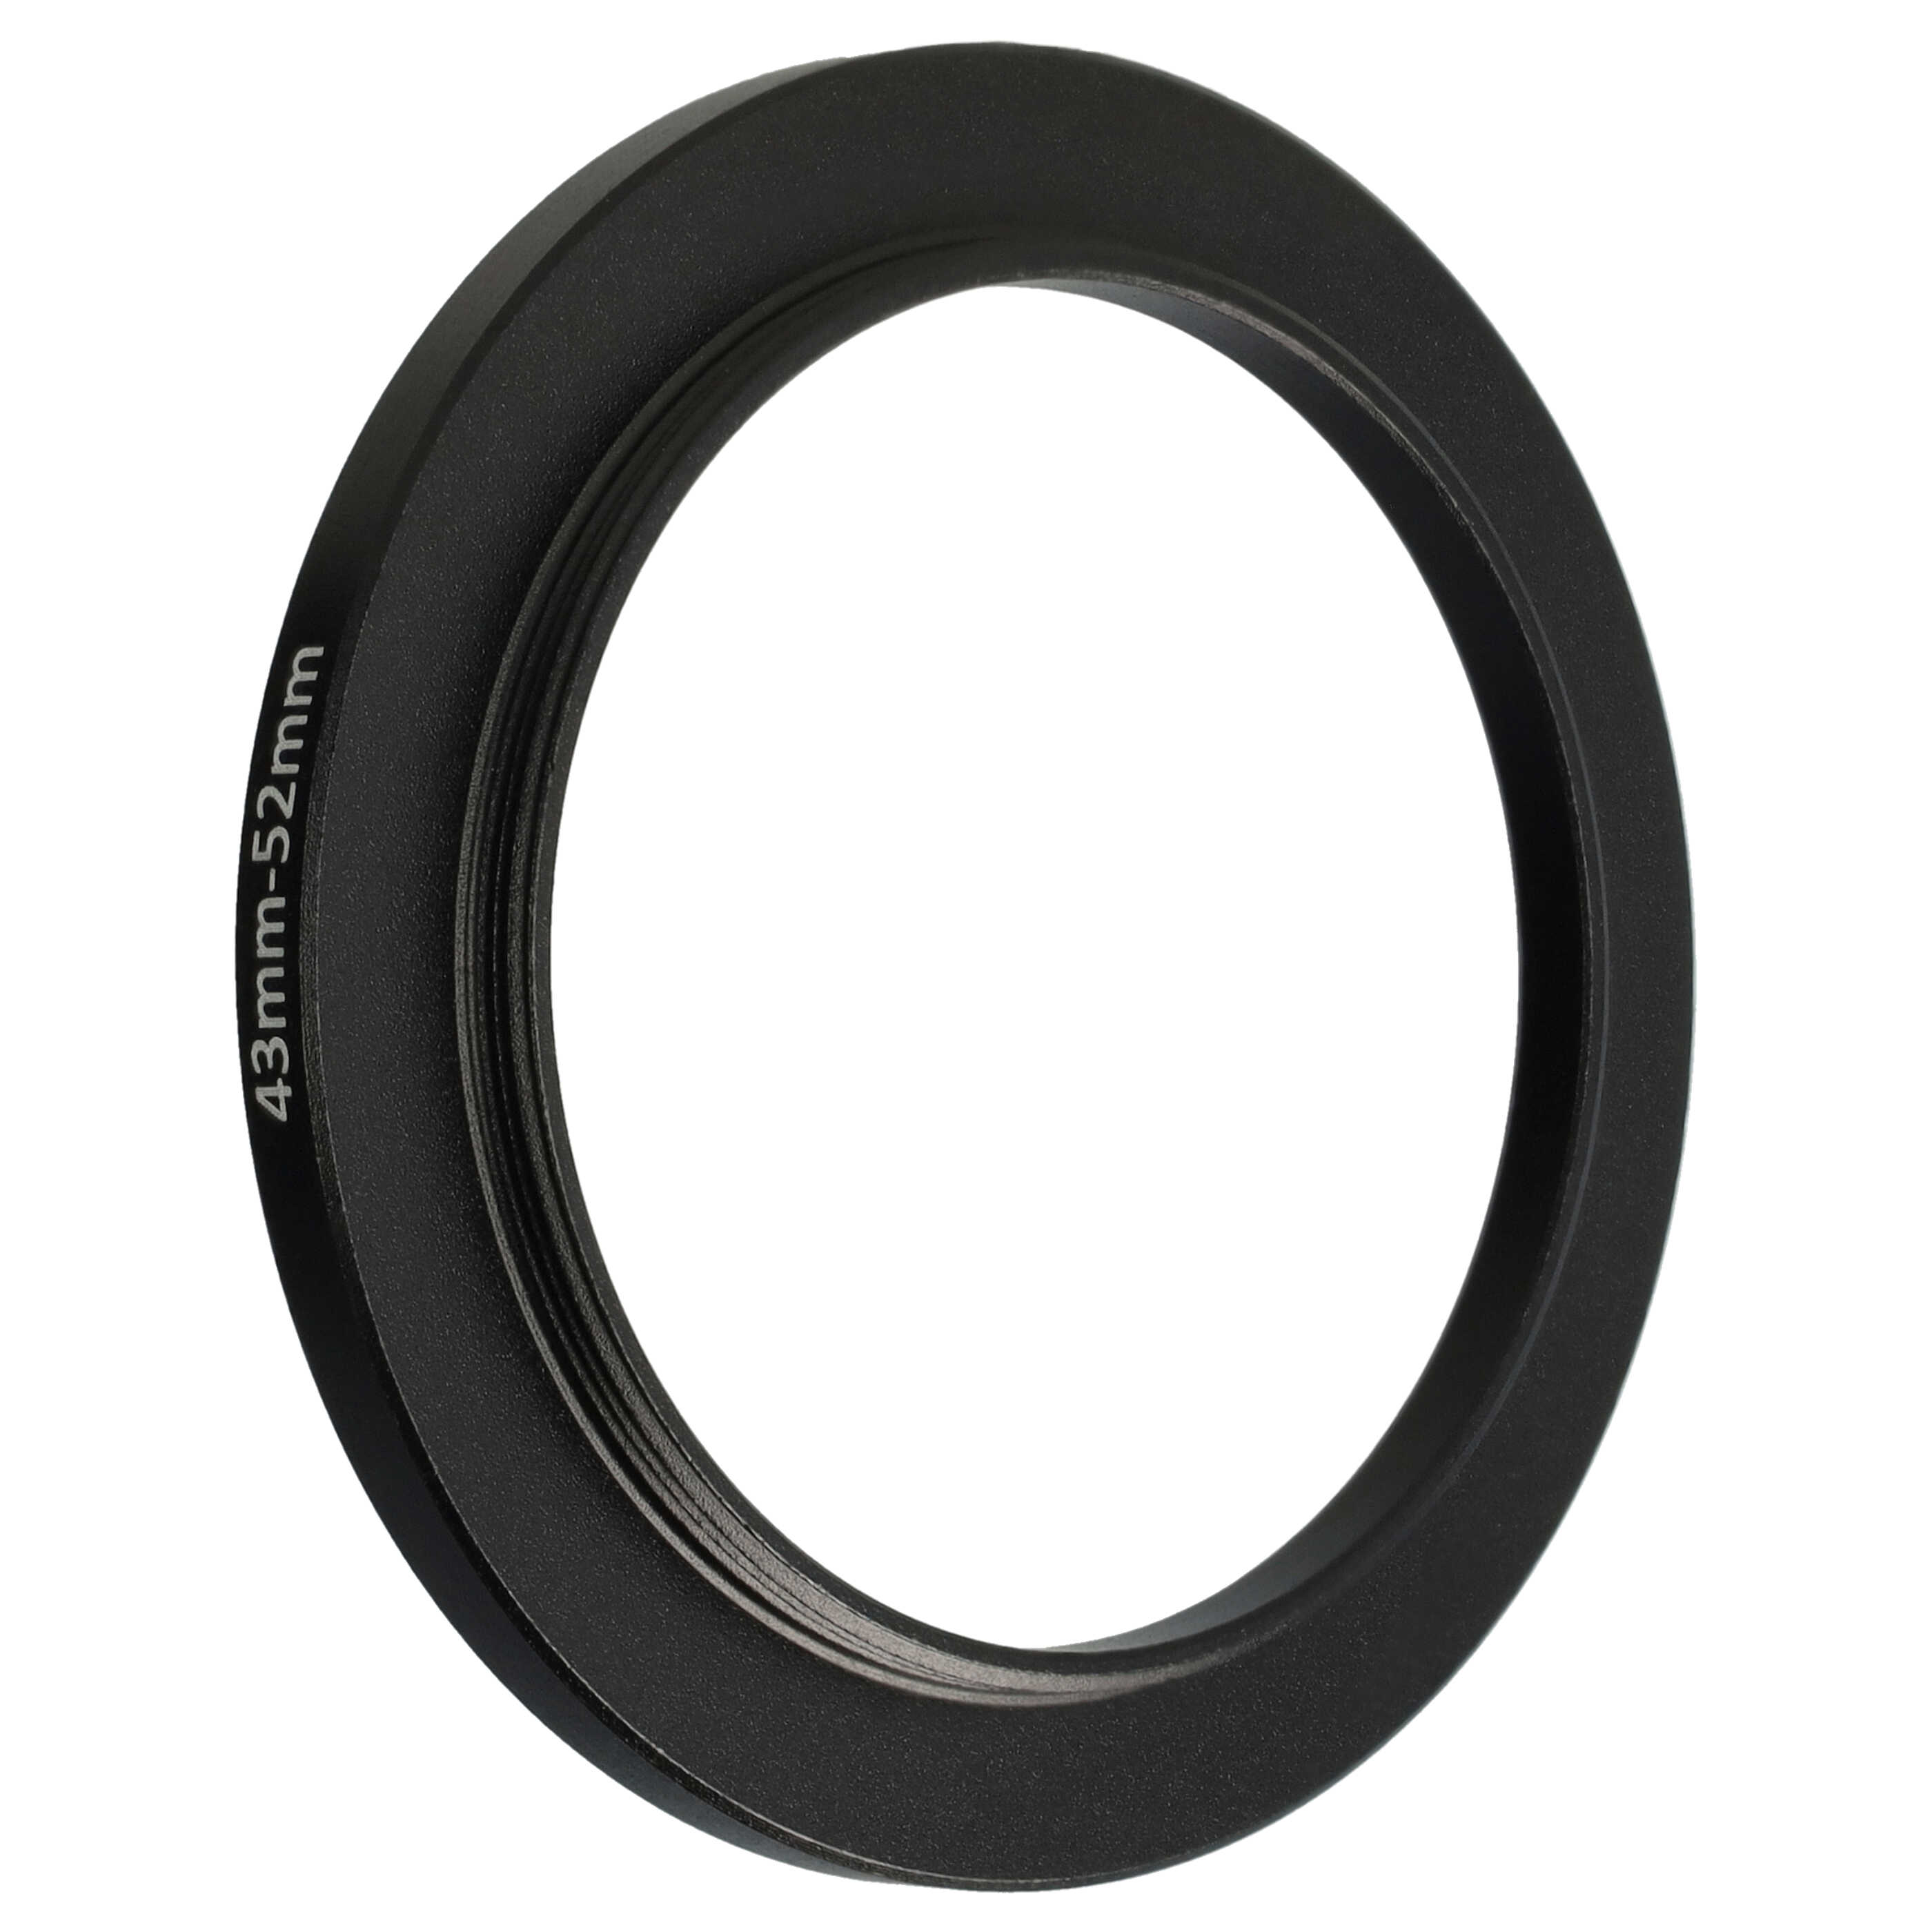 Step-Up Ring Adapter of 43 mm to 52 mmfor various Camera Lens - Filter Adapter